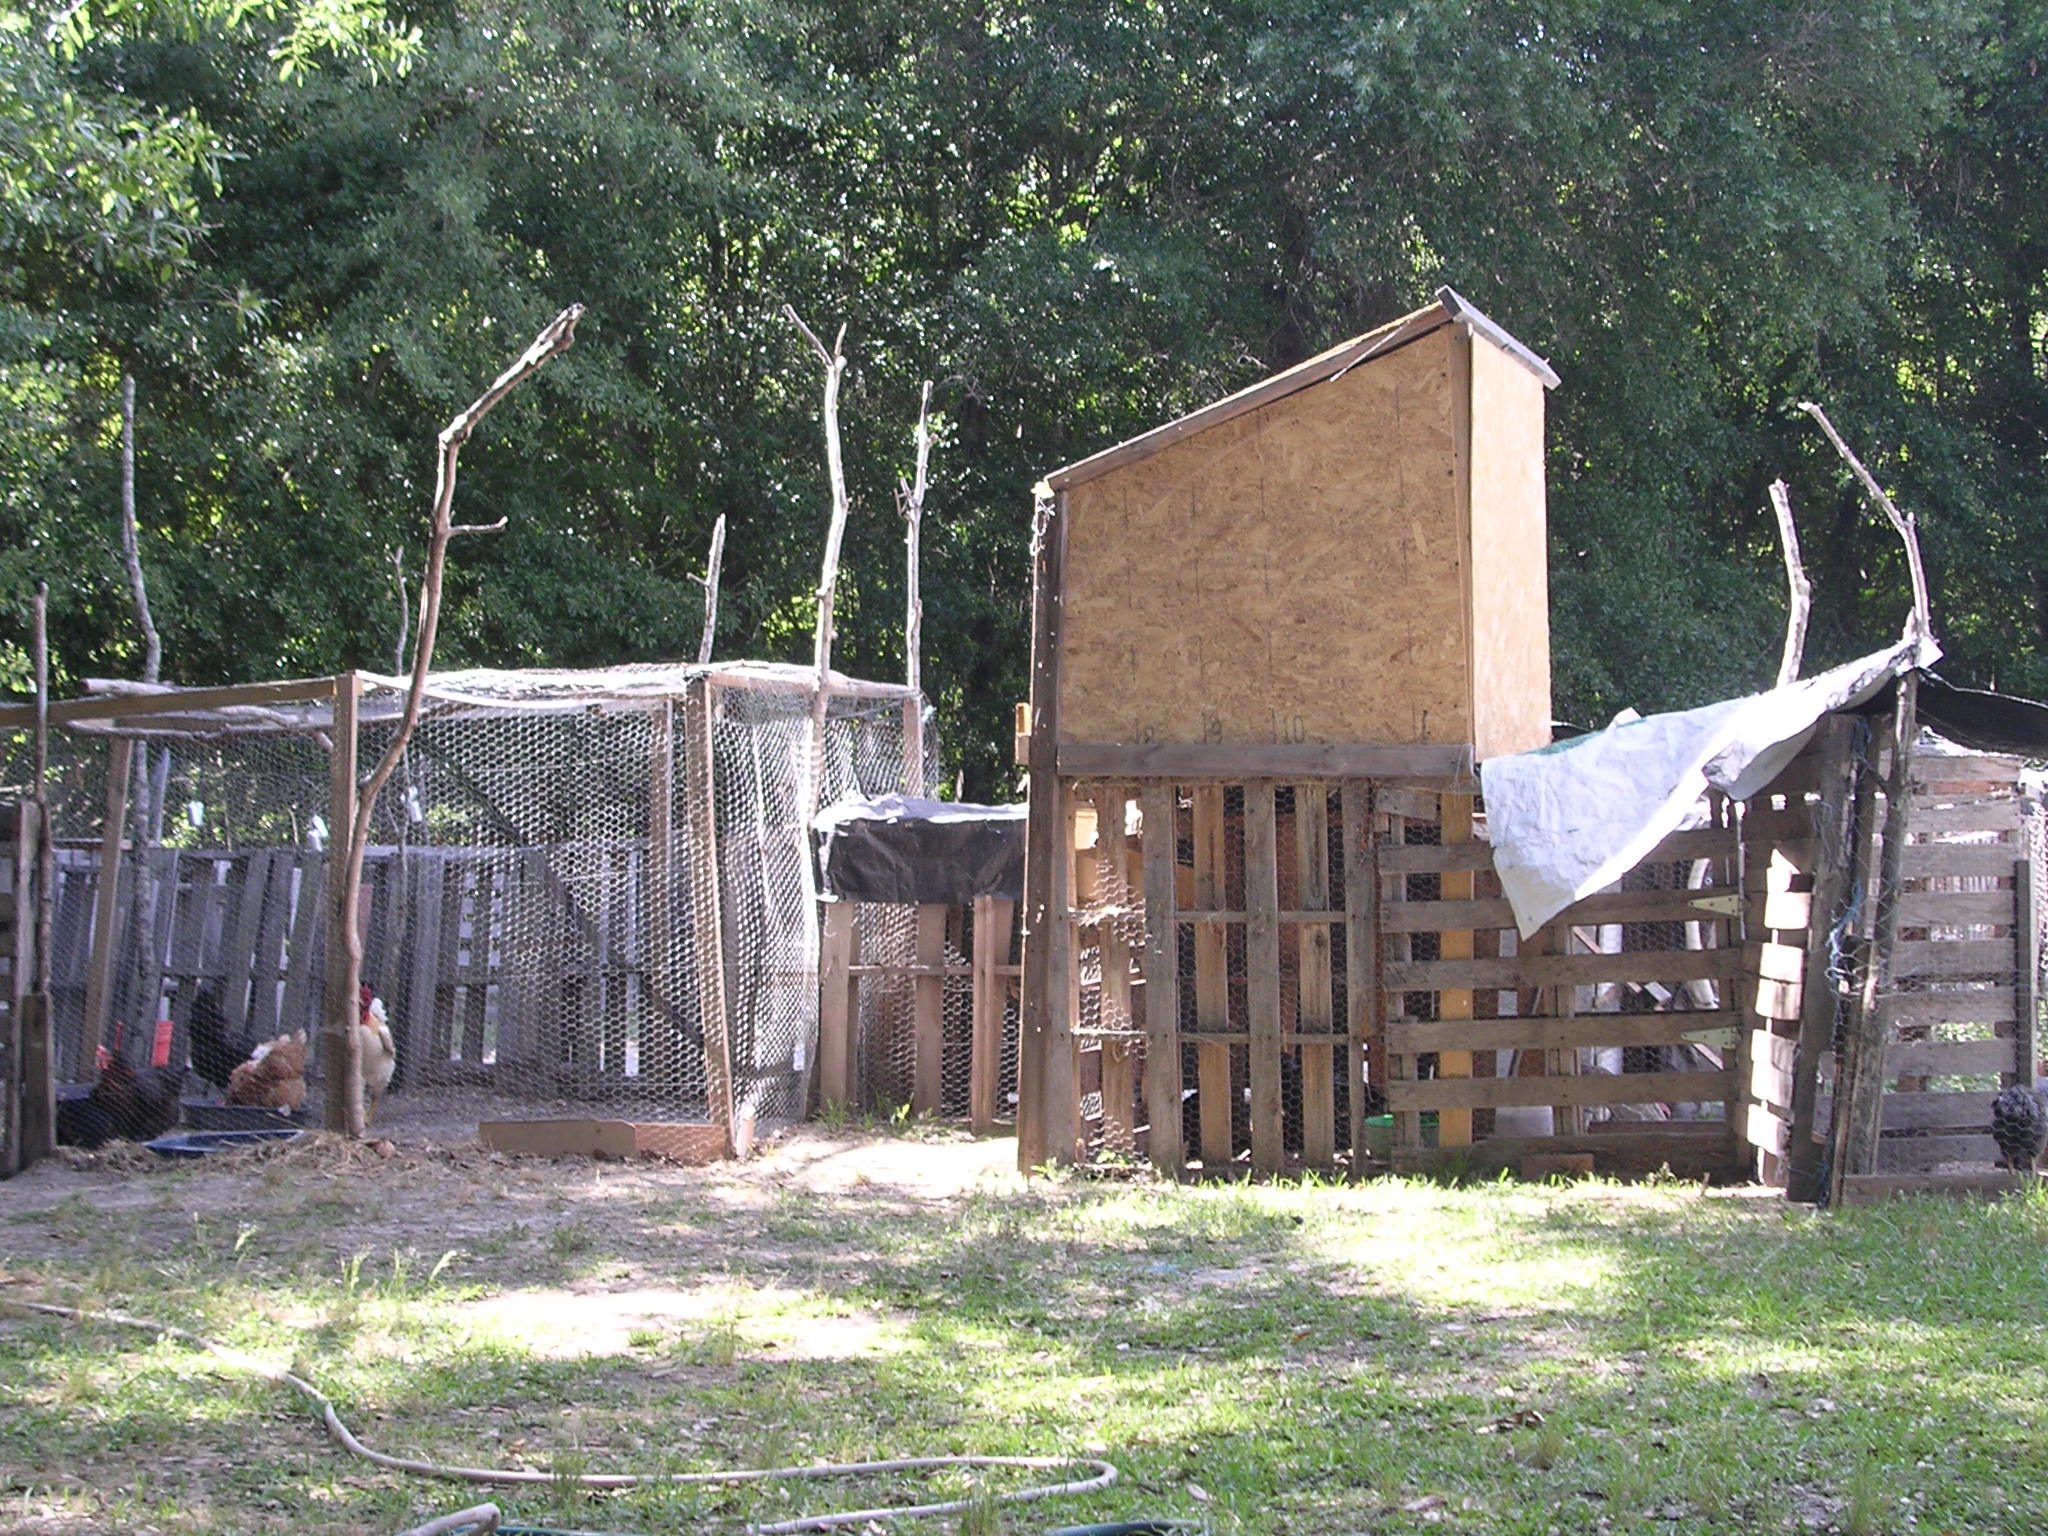 Our chicken coop is quickly becoming a chicken condo.